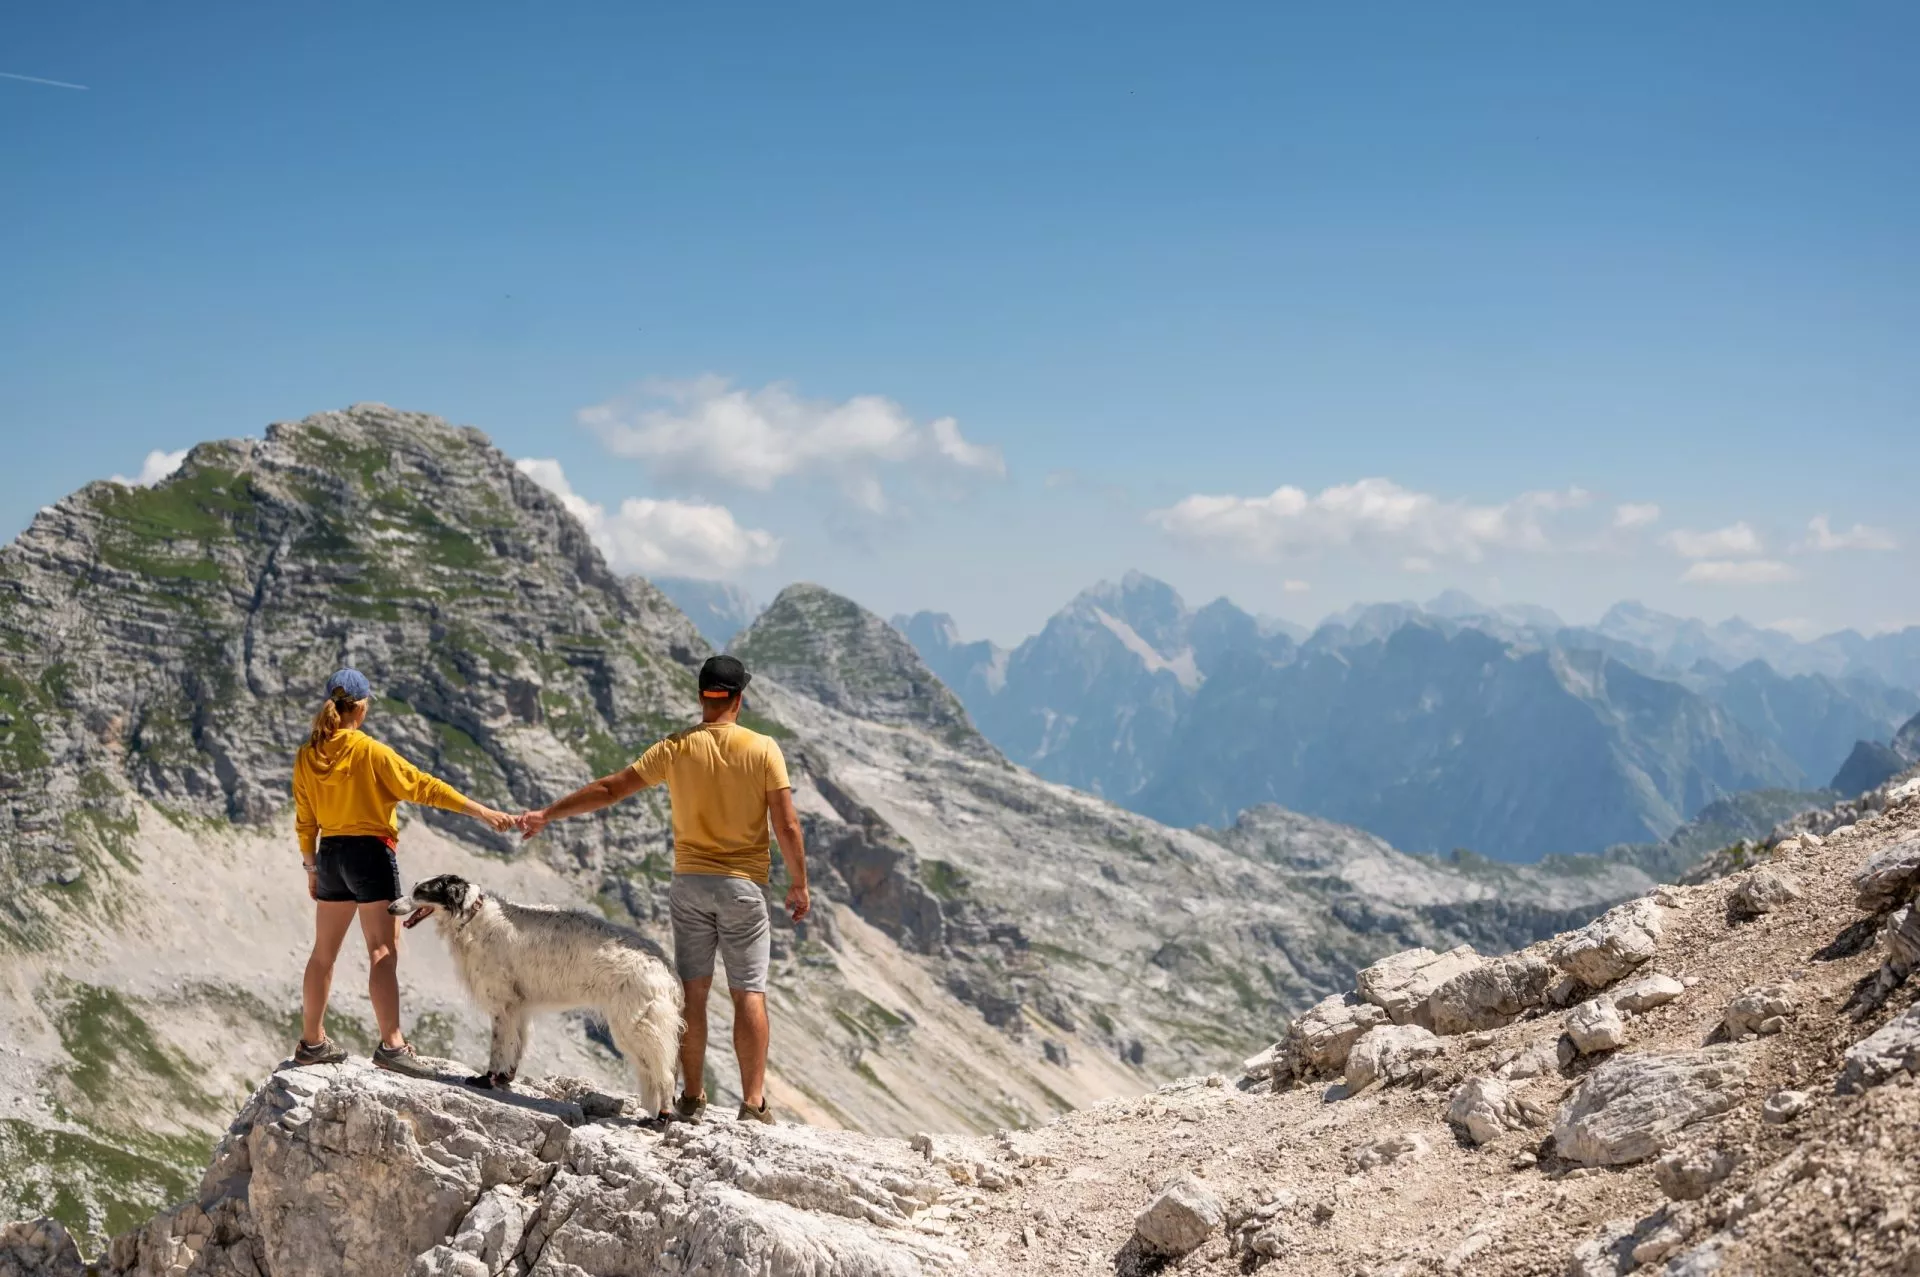 Admire the views from the peaks of the Julian Alps